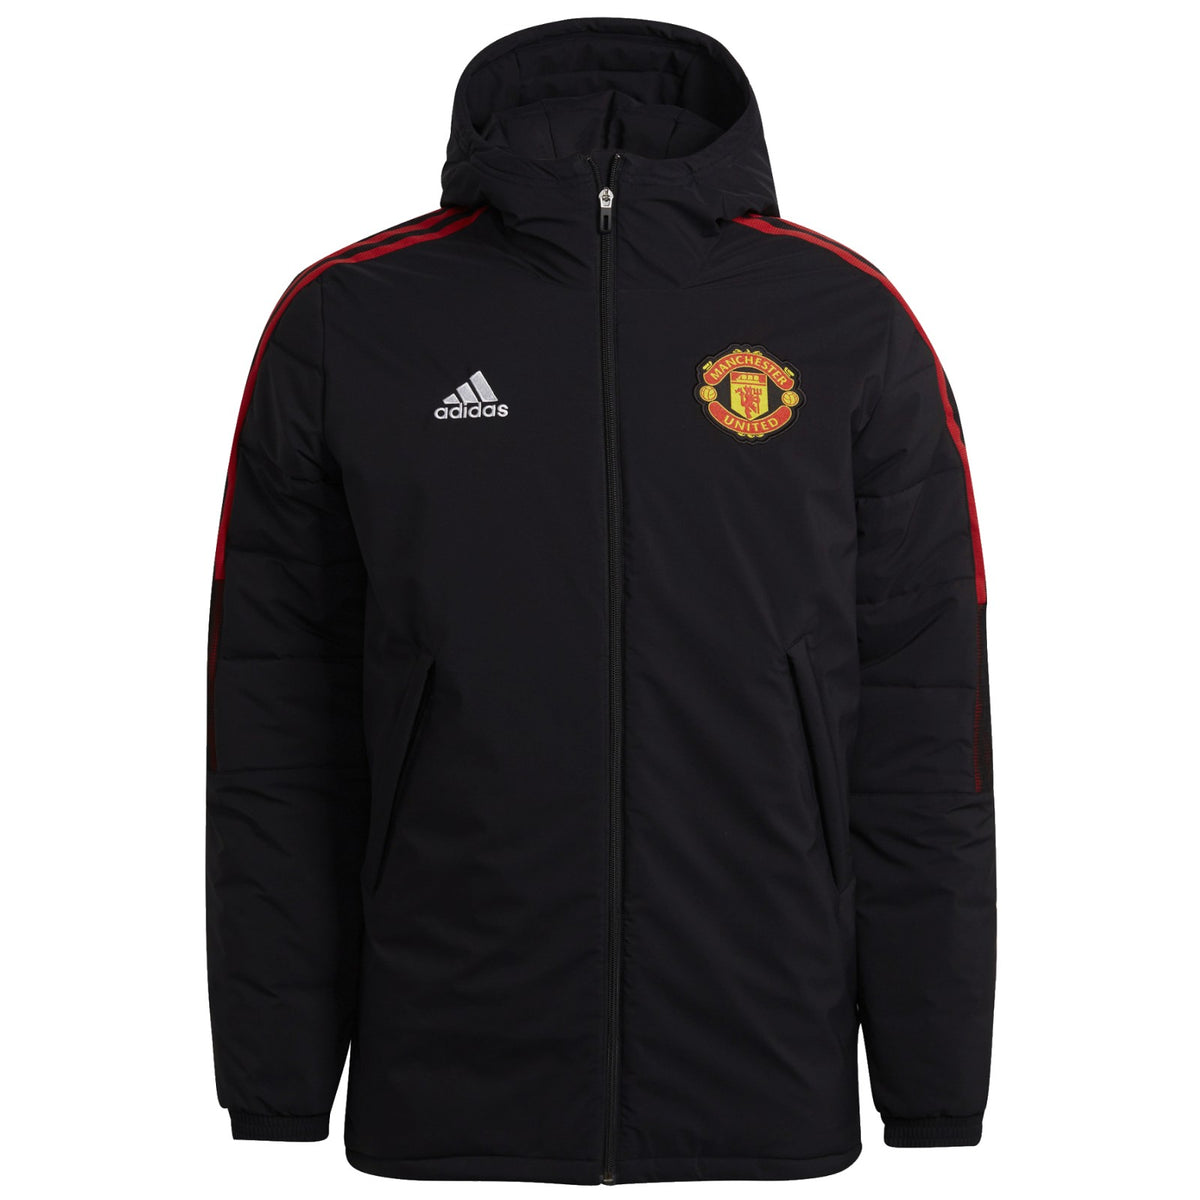 dat is alles Fruit groente hoofd Manchester United soccer retro bench padded jacket 2022 - Adidas –  SoccerTracksuits.com